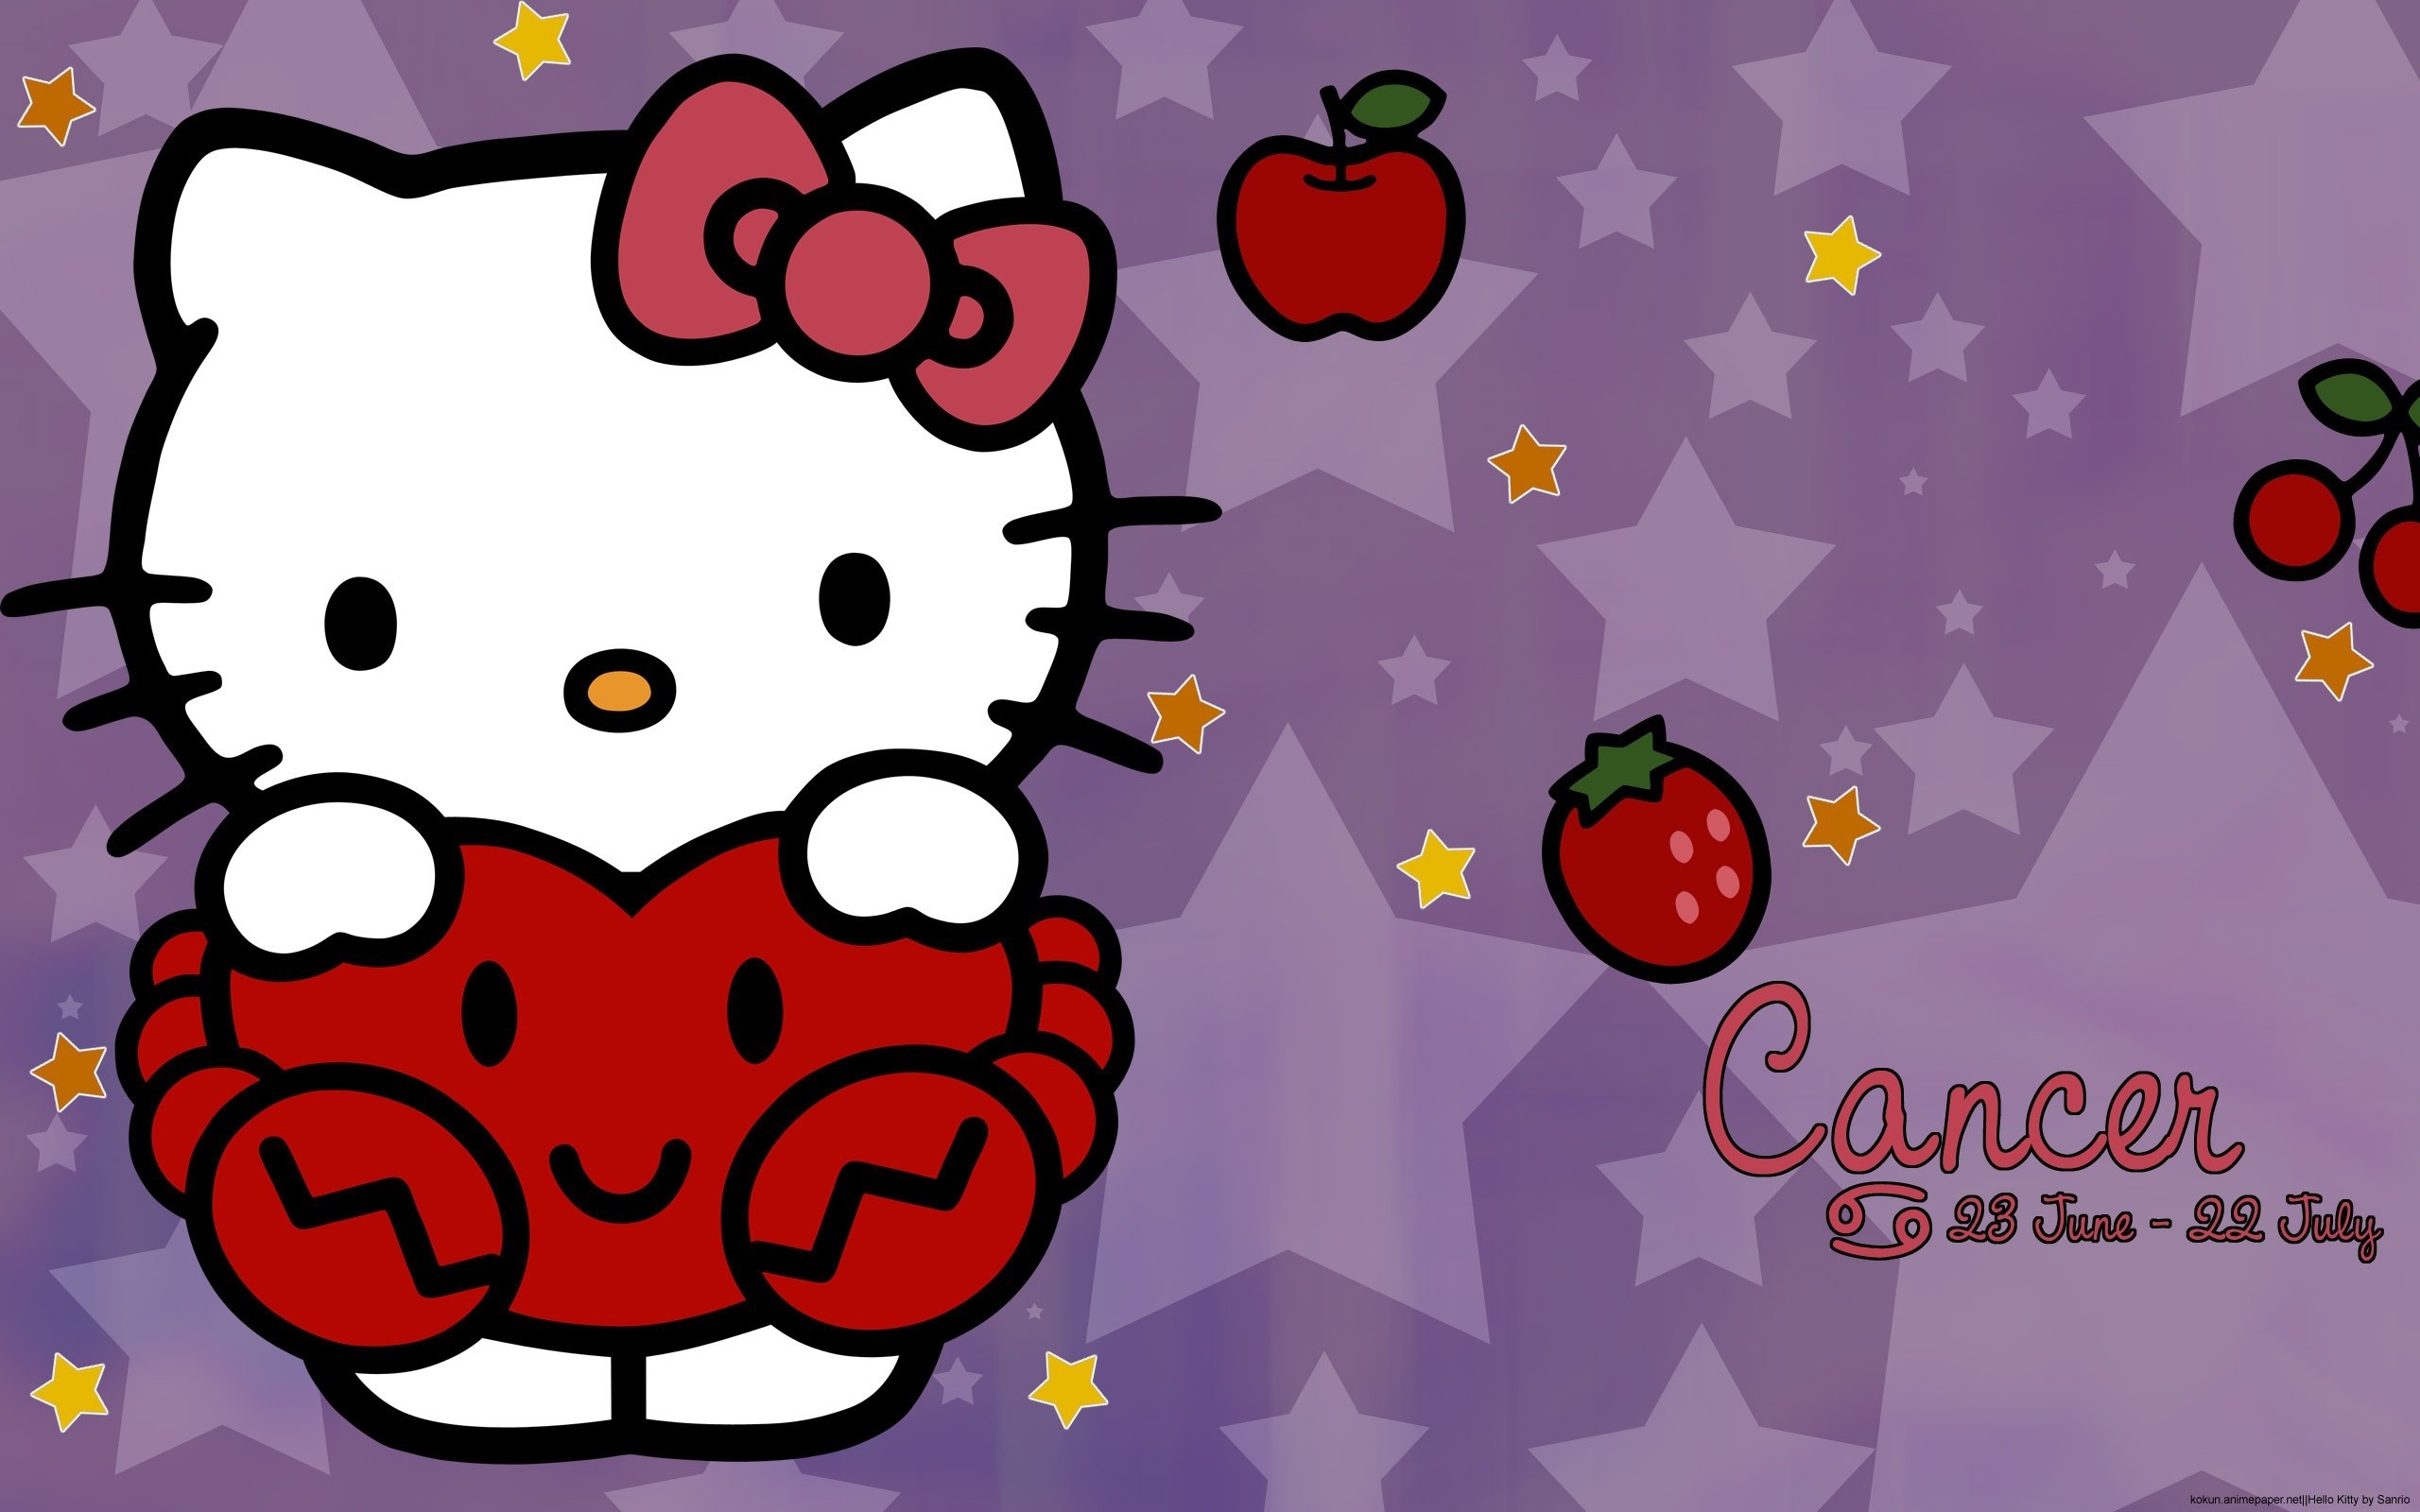 2560x1600 Purple Hello Kitty Wallpapers Wide For Desktop Wallpaper 2560 x 1600 px 1.2  MB hot pink